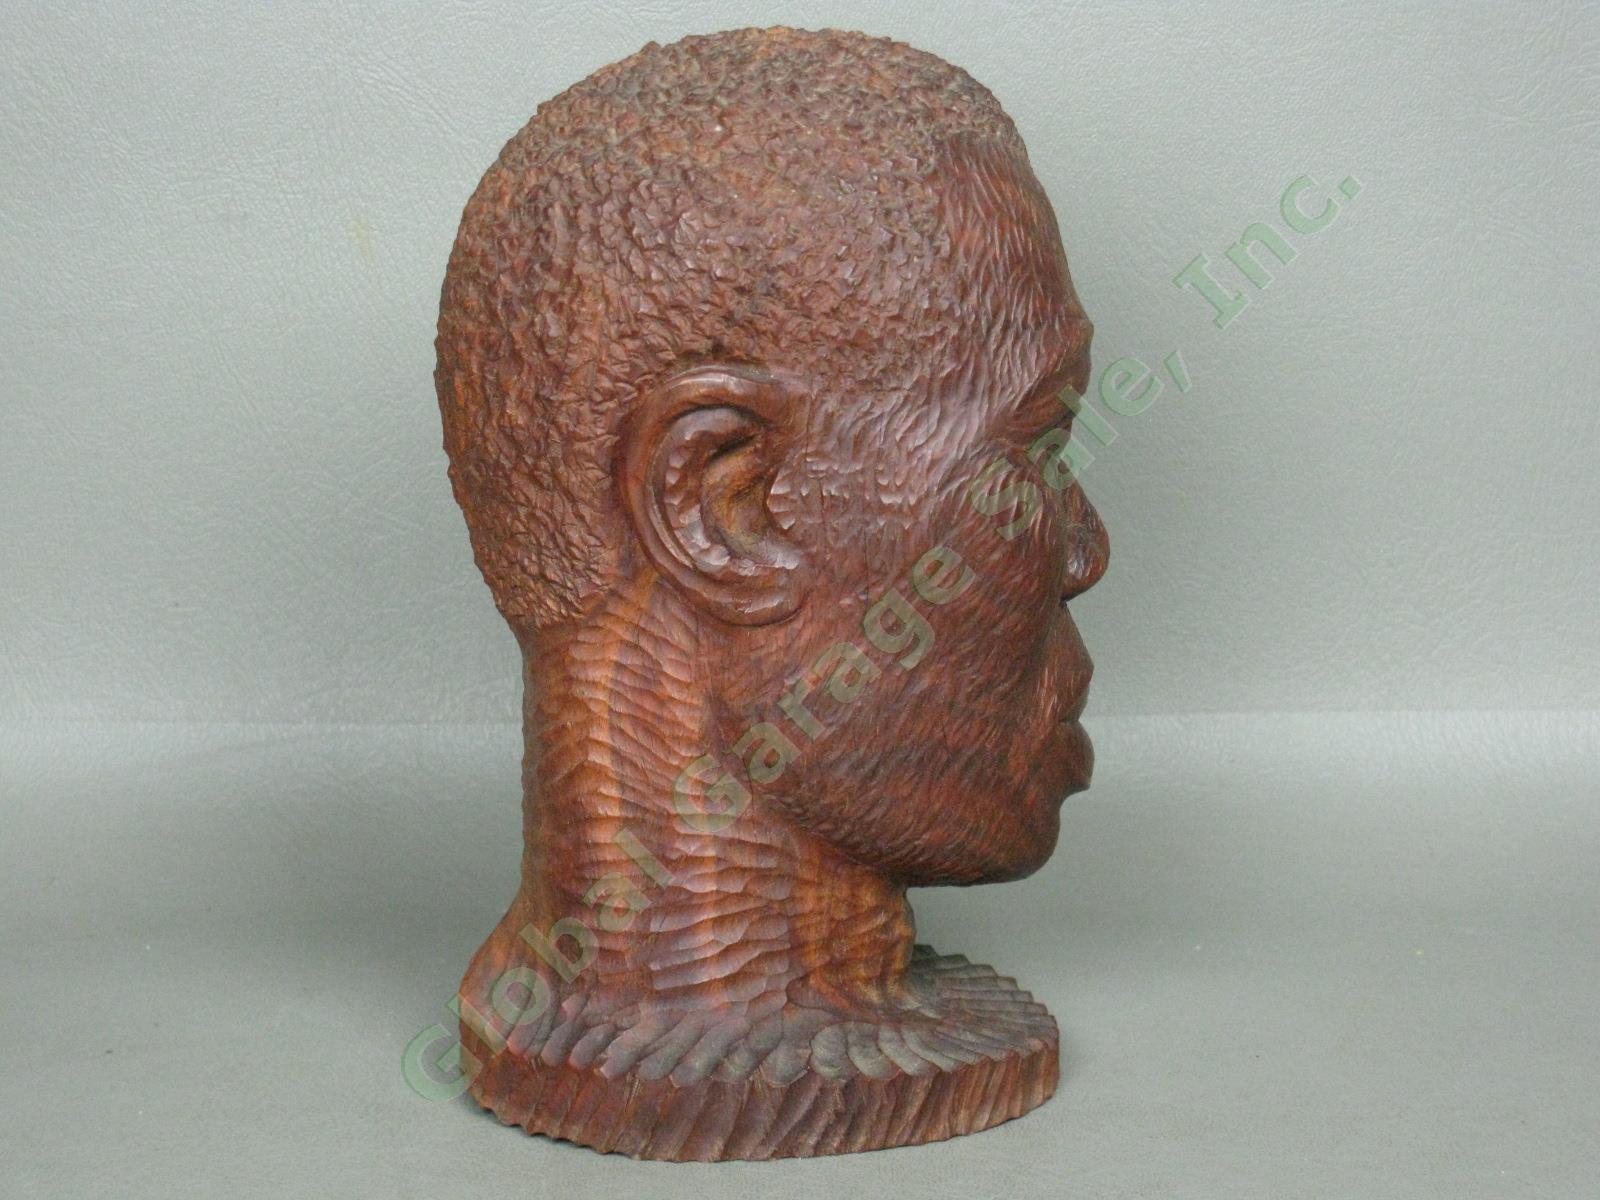 Vtg 1940s Jamaican Jamaica BWI 7" Male Head Bust Wood Carving Signed Lazarus NR! 3